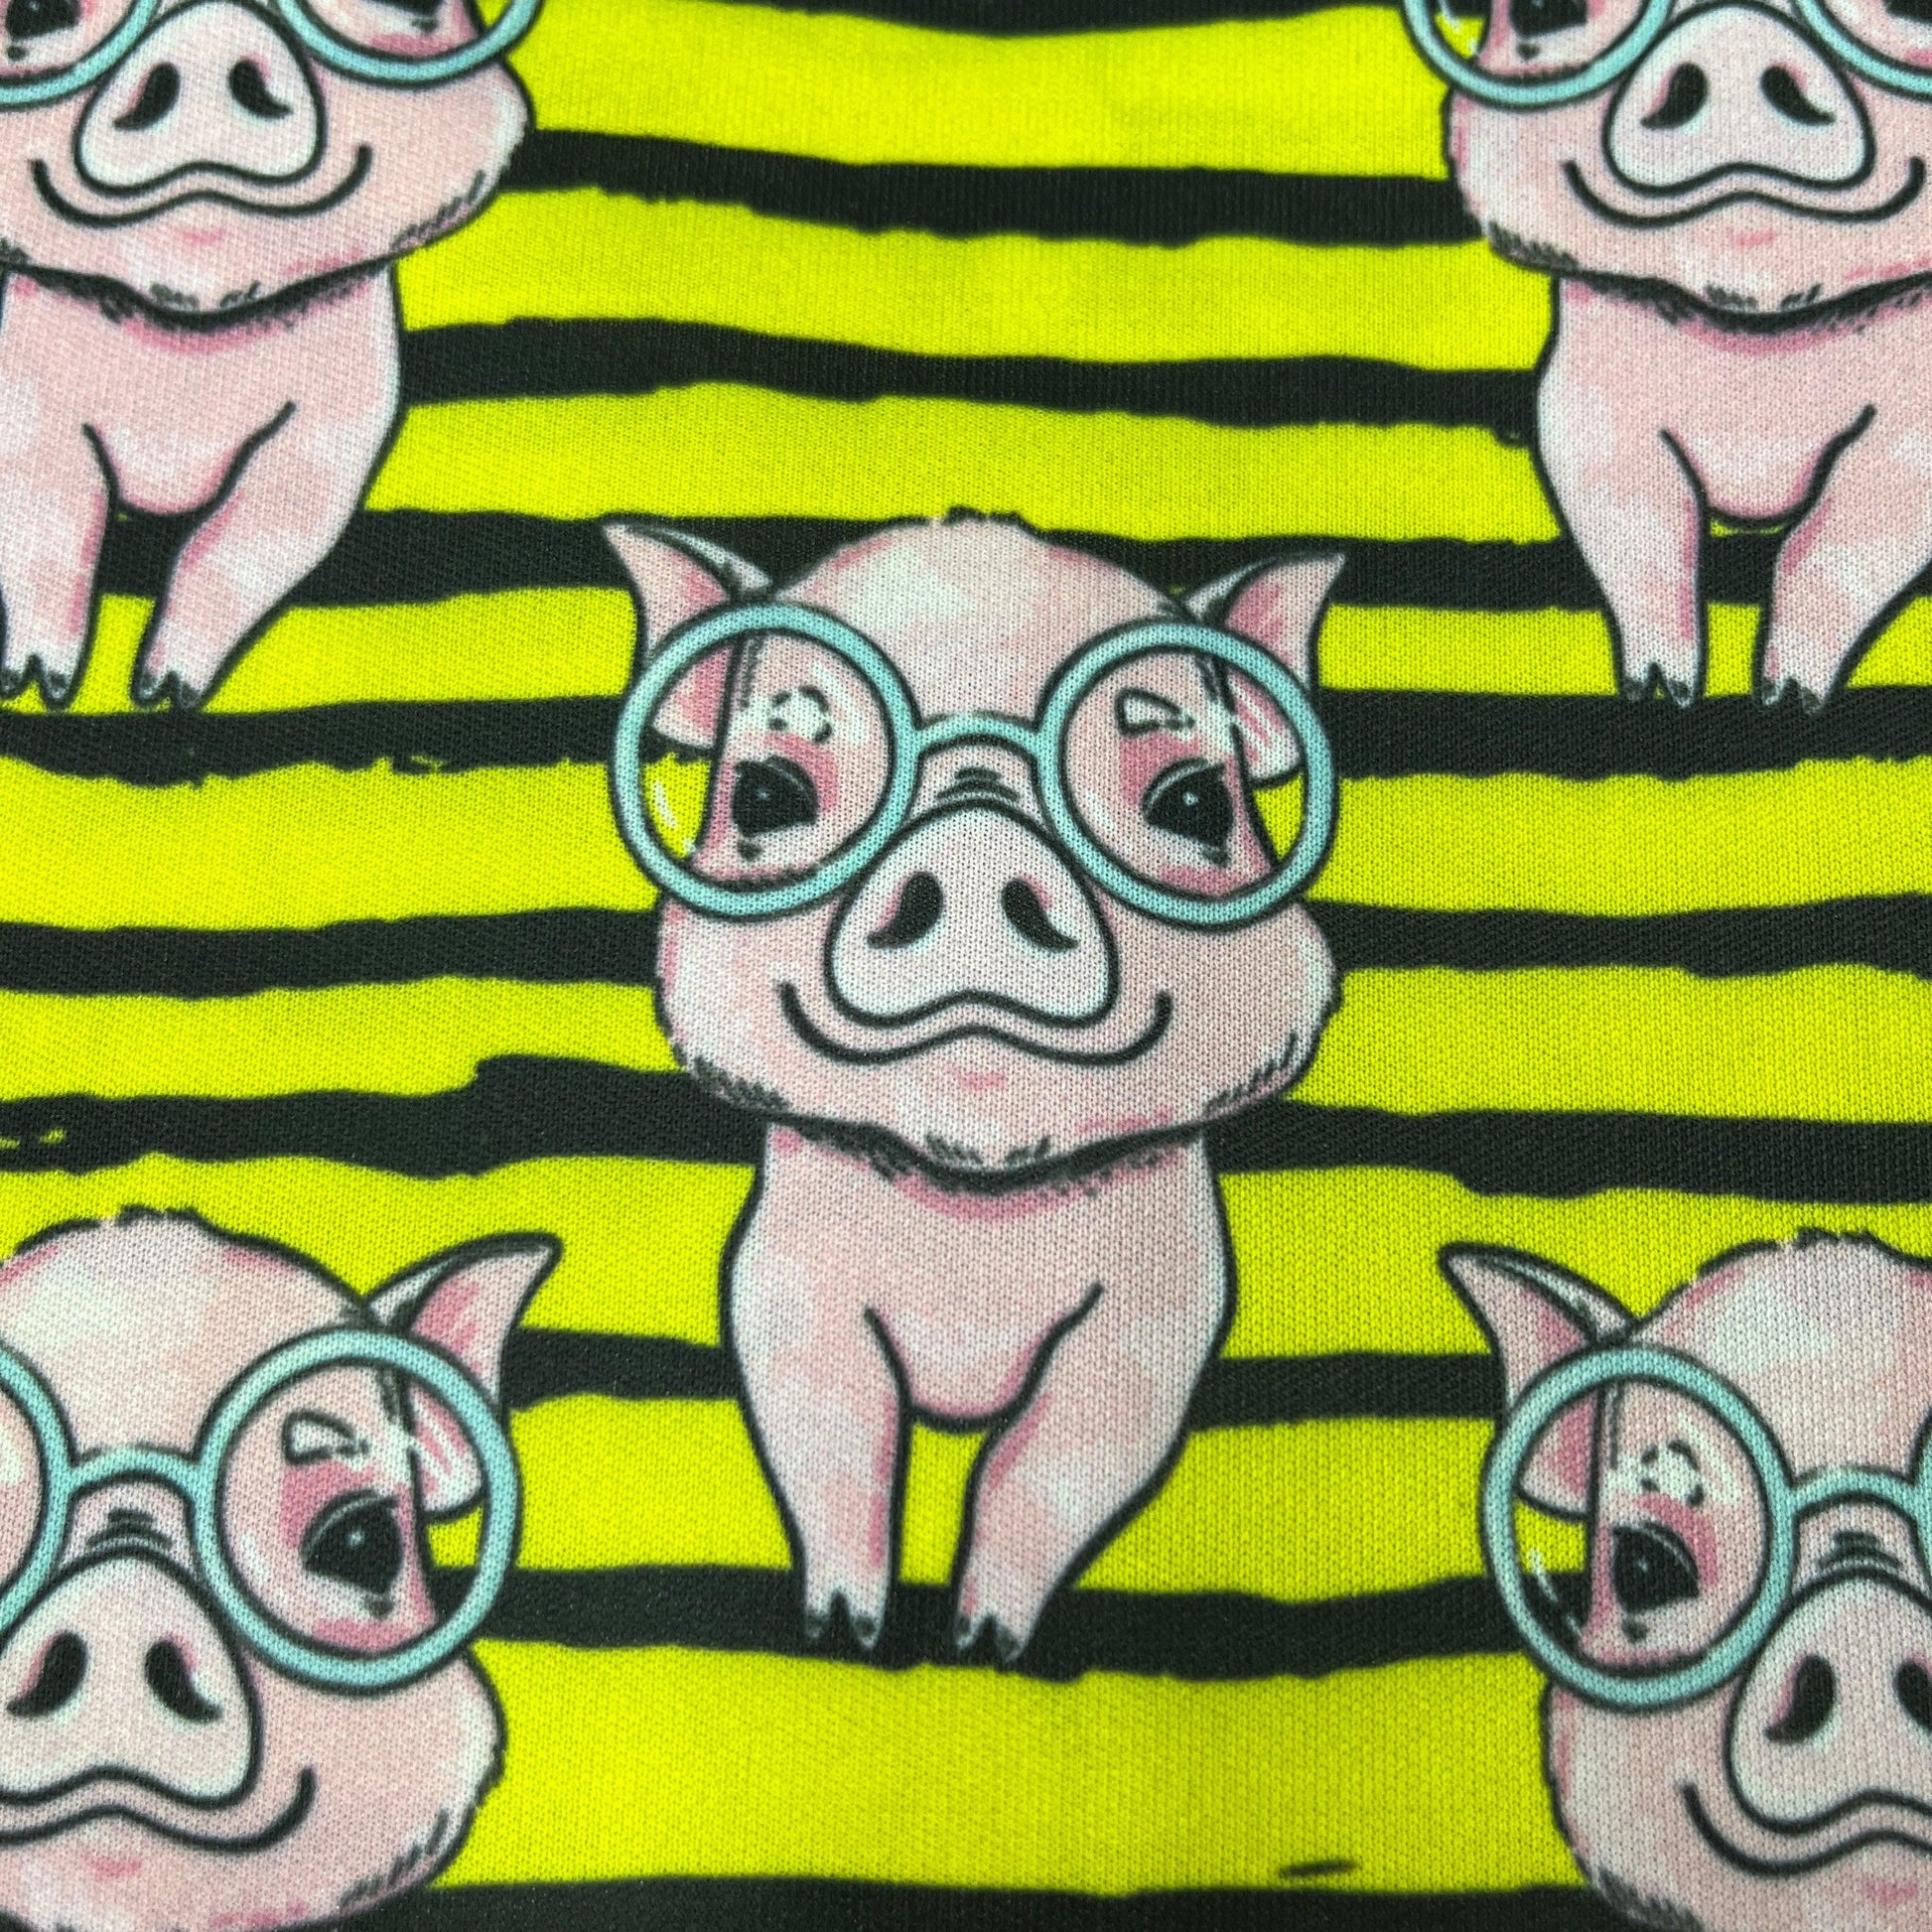 Pigs in Glasses 1 mil PUL Fabric - Made in the USA - Nature's Fabrics